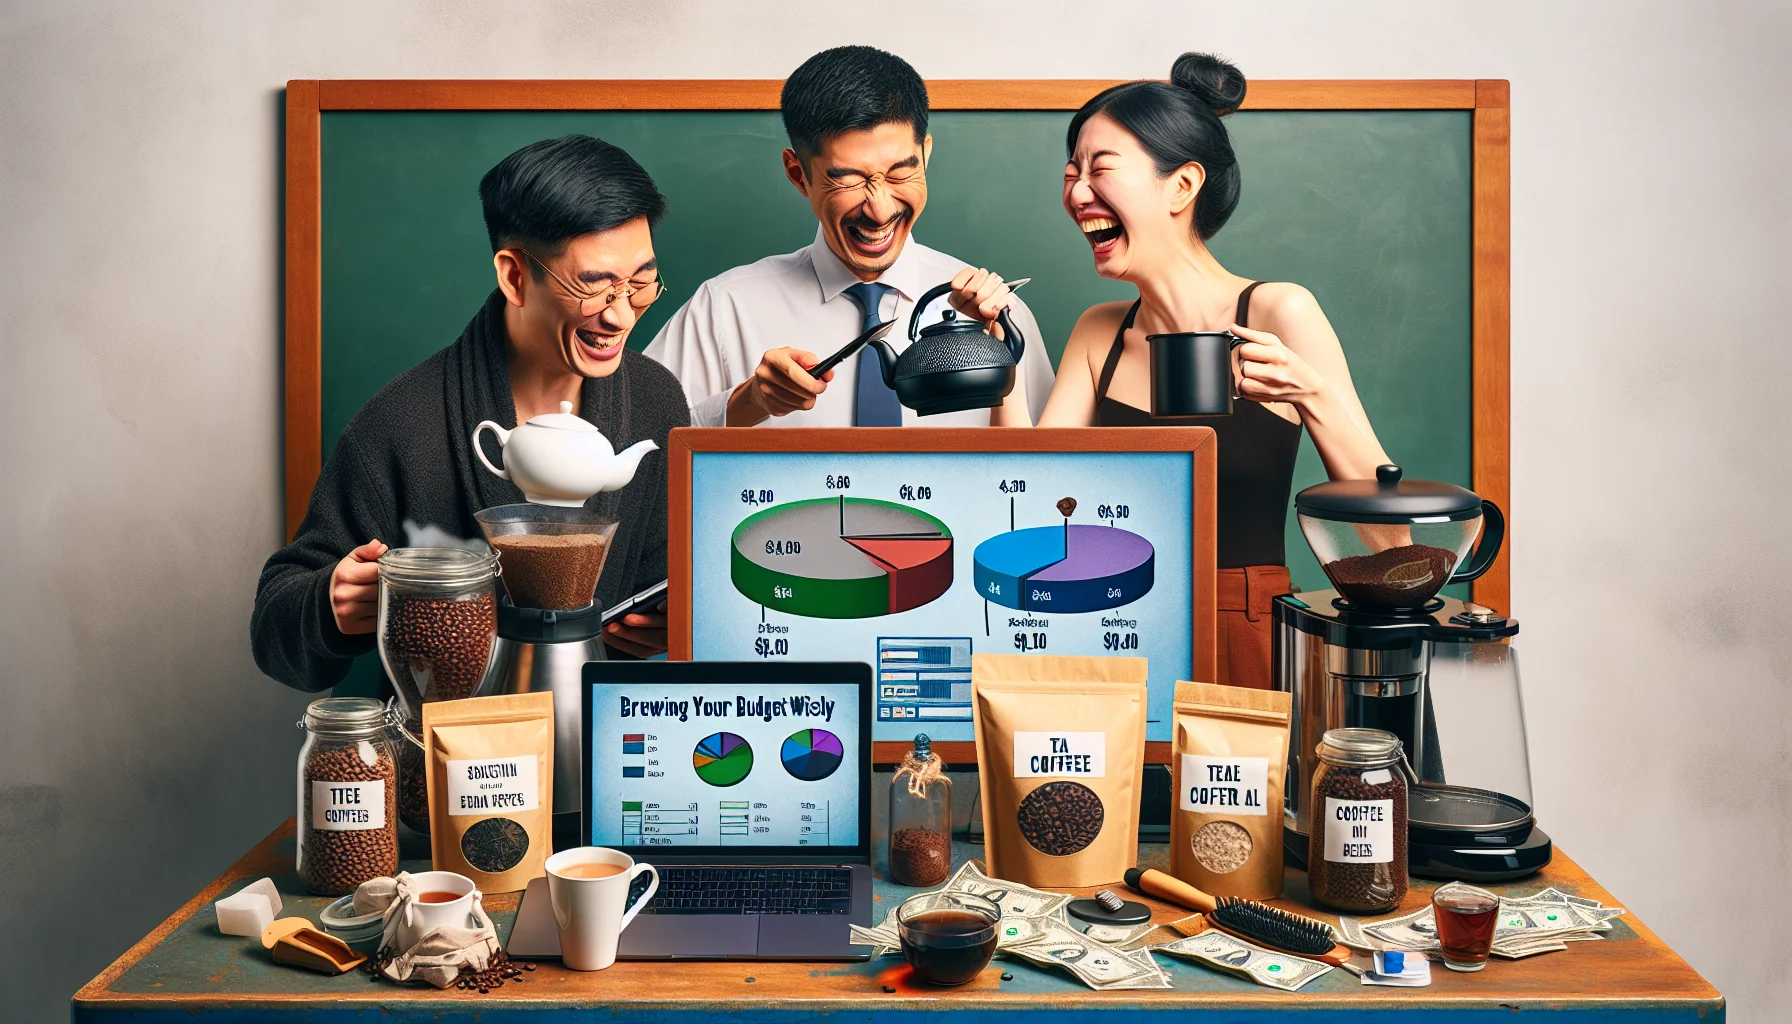 Create a humorous, reality-based scene representing proper financial management themed around tea and coffee brewing. The image should include a casual work-at-home setting, with an East Asian man attentively examining a teapot and a South Asian woman laughing while holding up a bag of budget-friendly coffee beans. Nearby, a laptop should display a funny pie chart titled 'Brewing Your Budget Wisely', dividing funds between tea, coffee, and savings. Include various affordable tea and coffee products scattered around, such as packs of tea leaves, jars of instant coffee, a French press, and a coffee grinder.